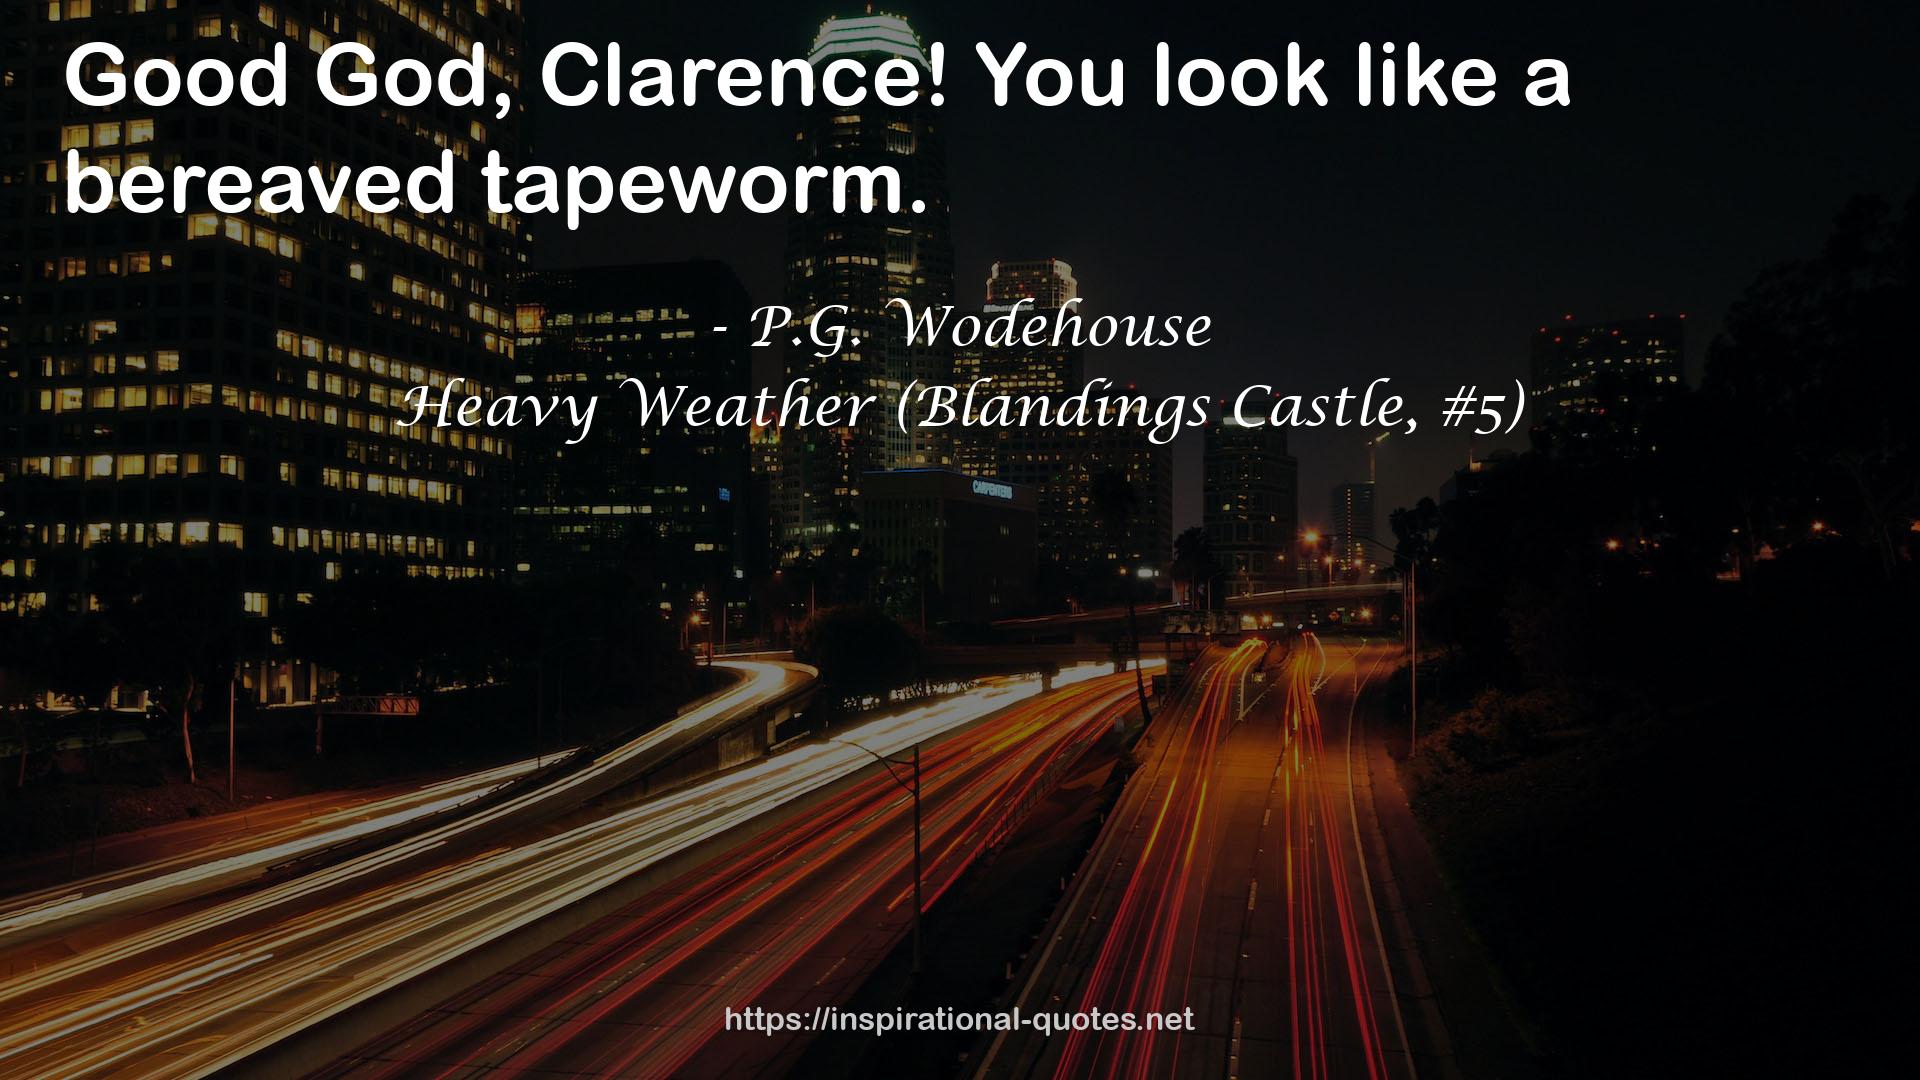 Heavy Weather (Blandings Castle, #5) QUOTES